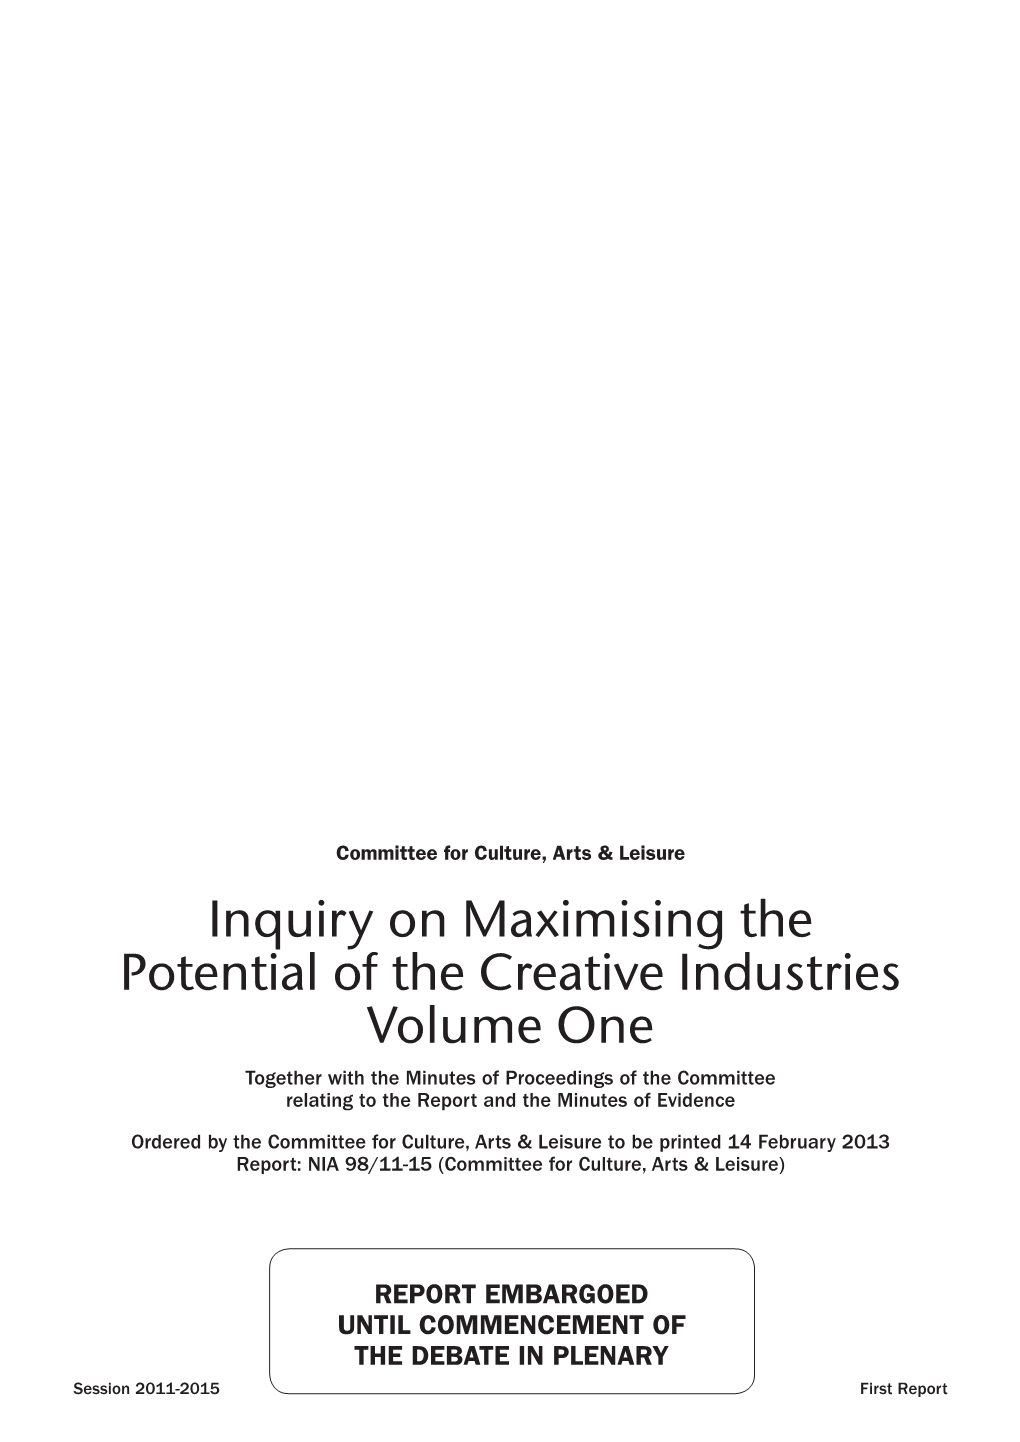 Inquiry on Maximising the Potential of the Creative Industries Volume